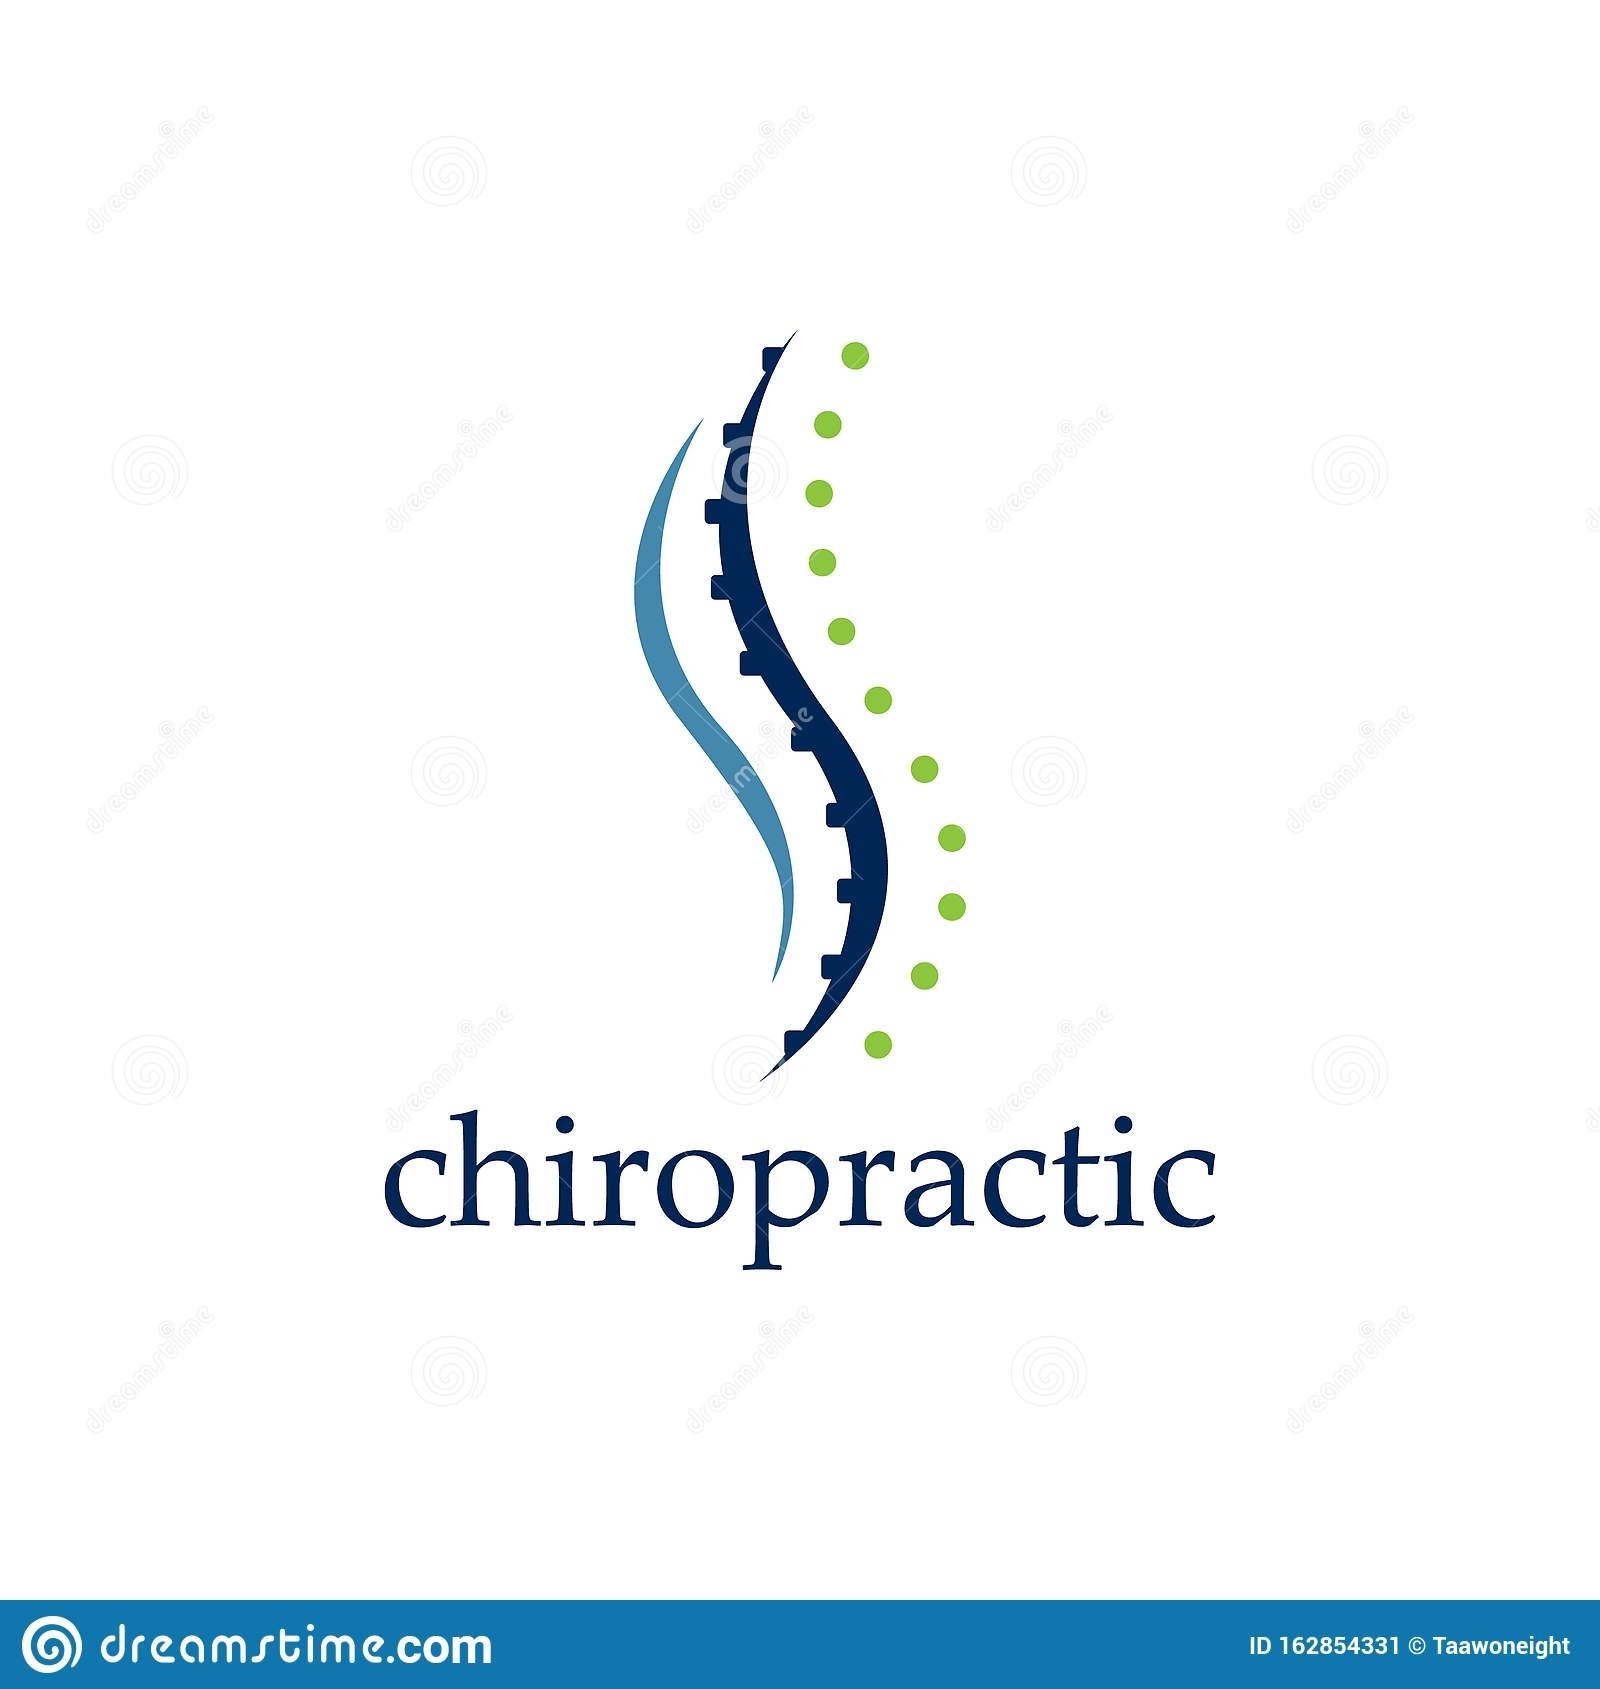 Chiropractic Travel Card Template In Chiropractic Travel Card Template